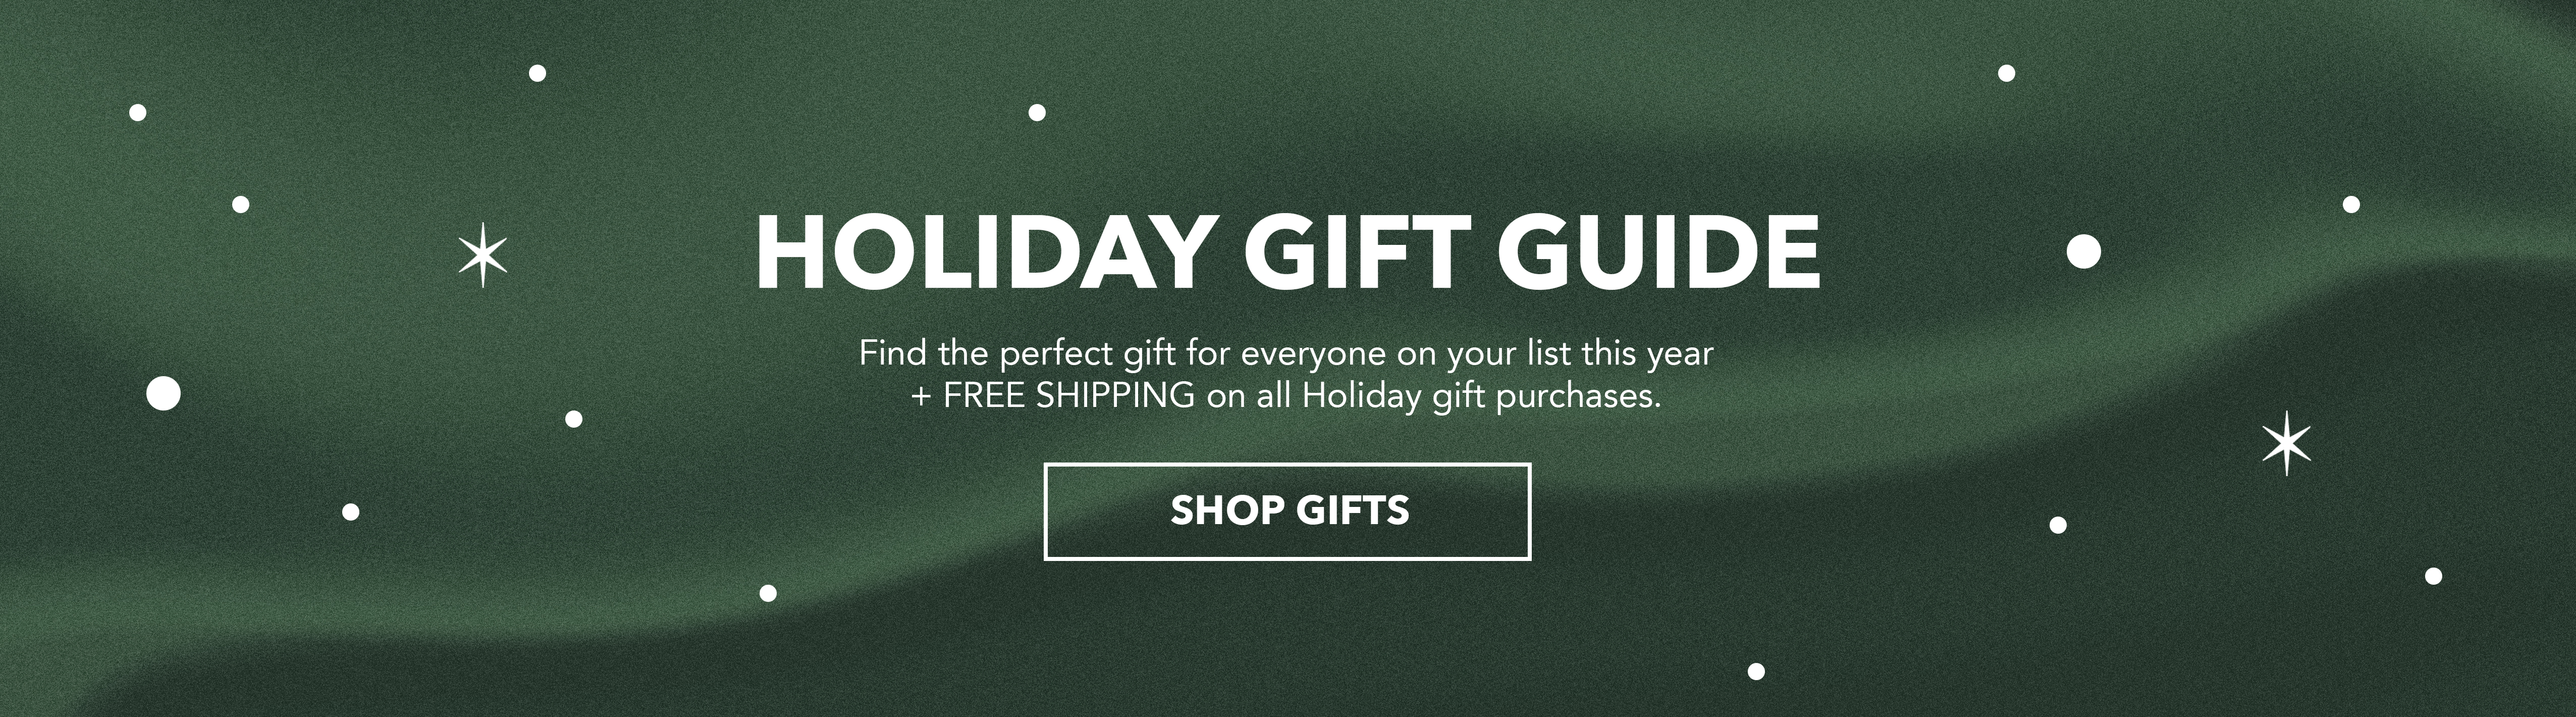 Christmas Gift Guide. Find the perfect gift for everyone on your list